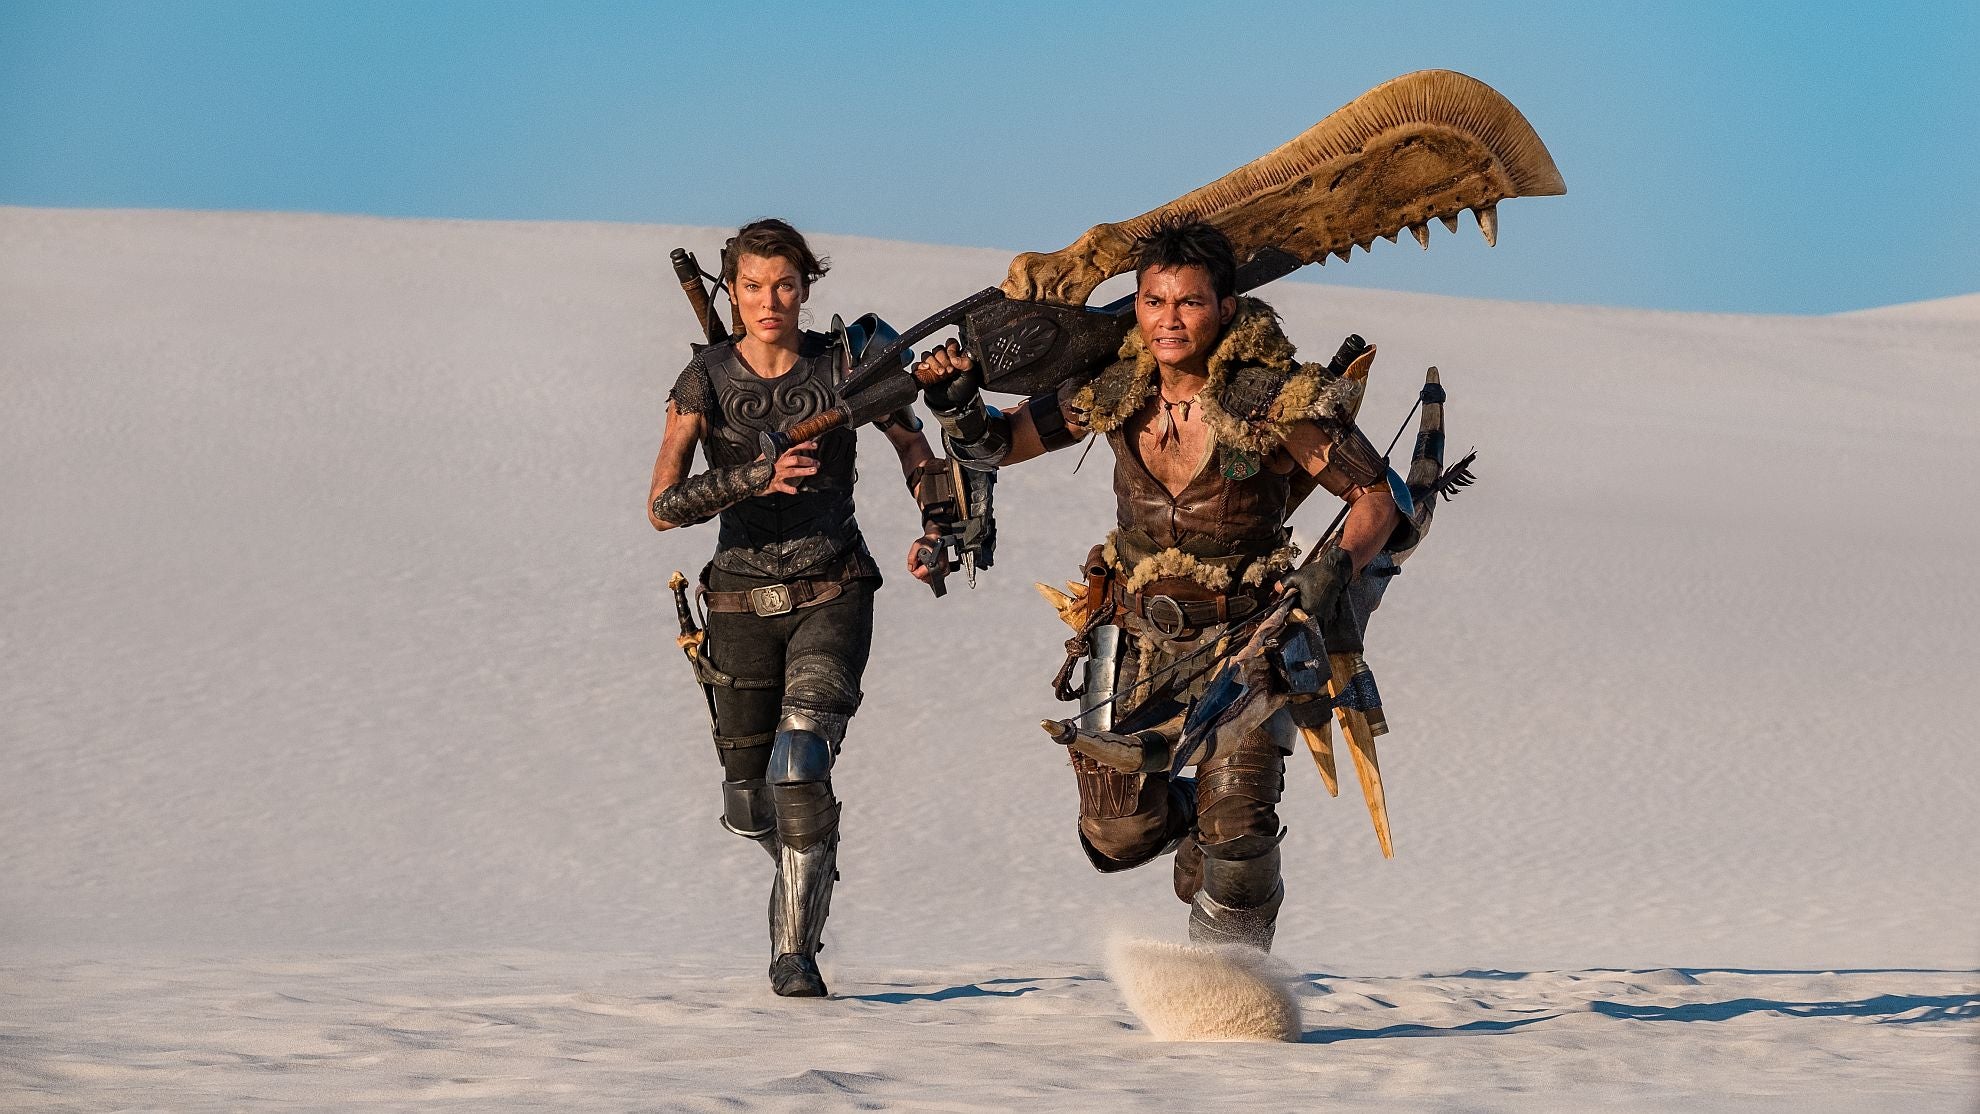 Image for Monster Hunter film producer apologizes for offensive rhyme that led to it being pulled from Chinese cinemas